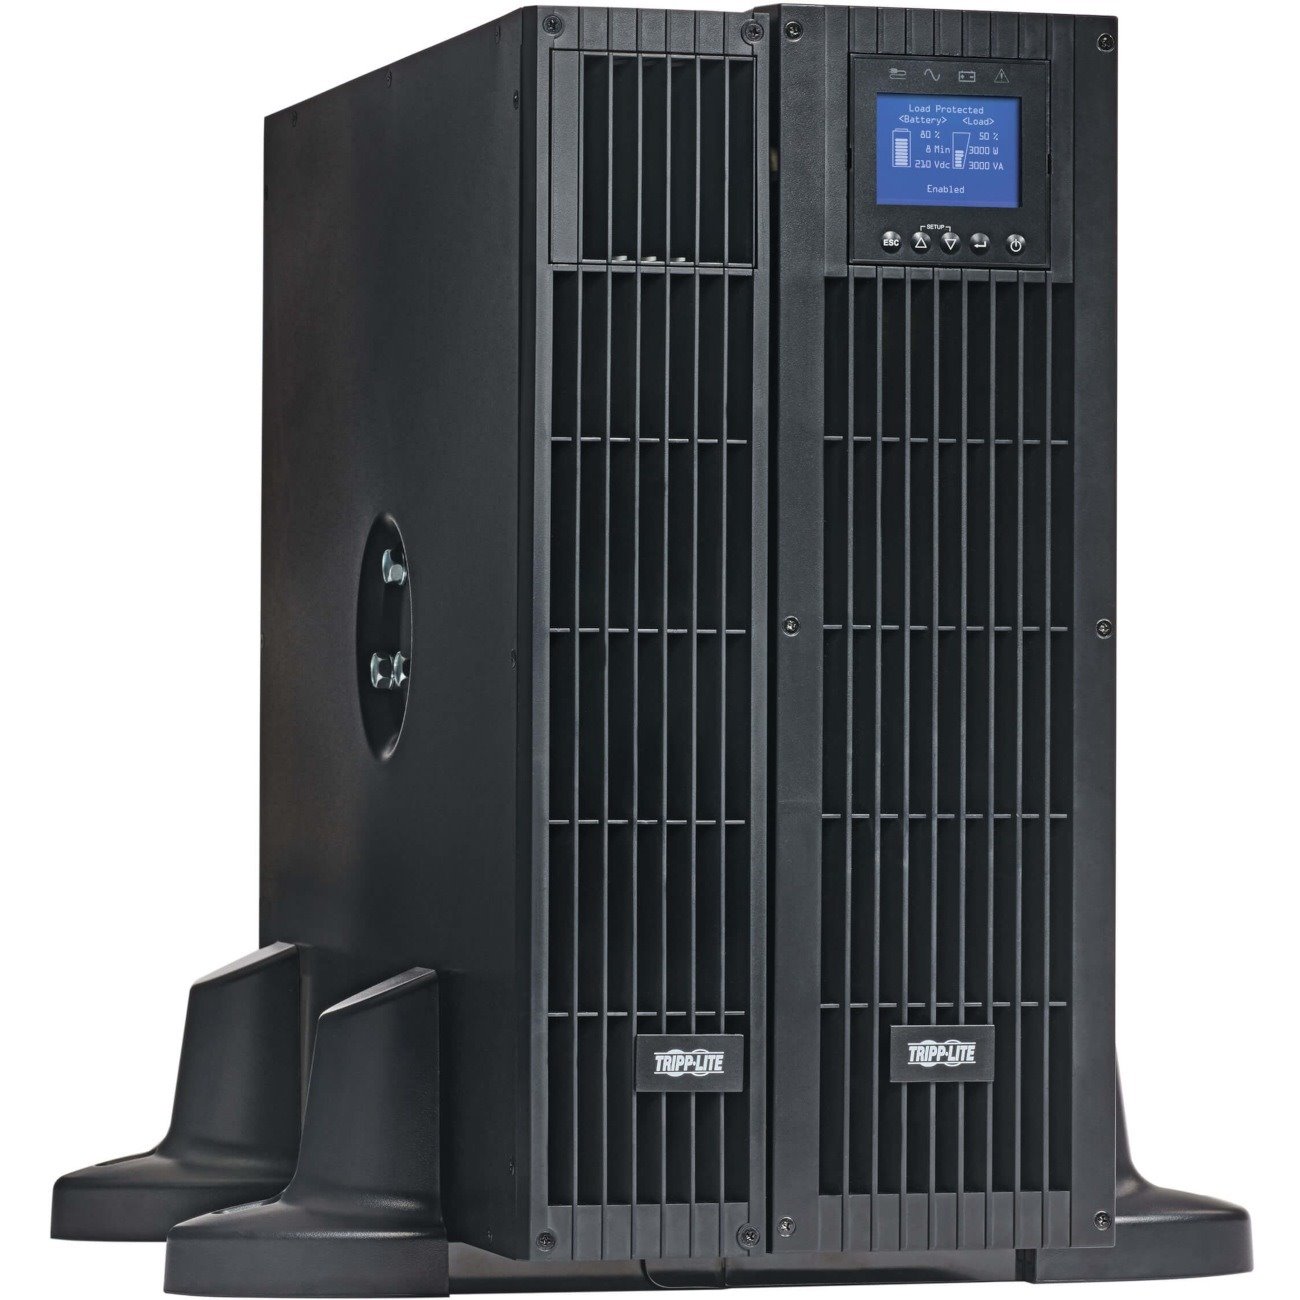 Tripp Lite by Eaton UPS 208V 5000VA 5000W On-Line UPS Unity Power Factor with Bypass PDU and 120V Transformer Hardwire/L6-30P Input 5U